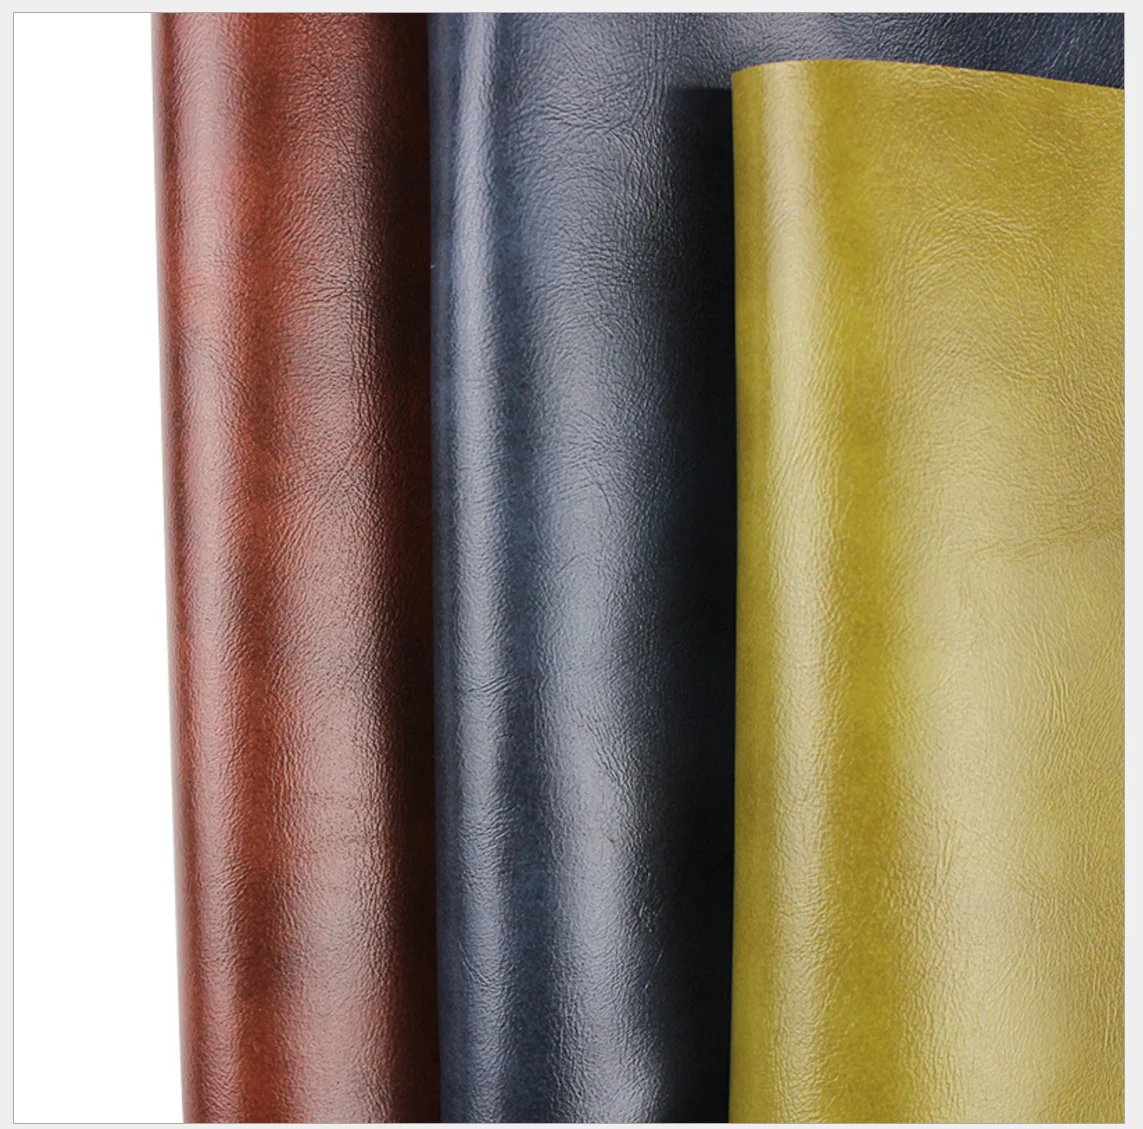 
wholesale high quality imitation PVC microfiber leatherette for sofa cover headboard bedroom furniture in stock  (1600202392877)